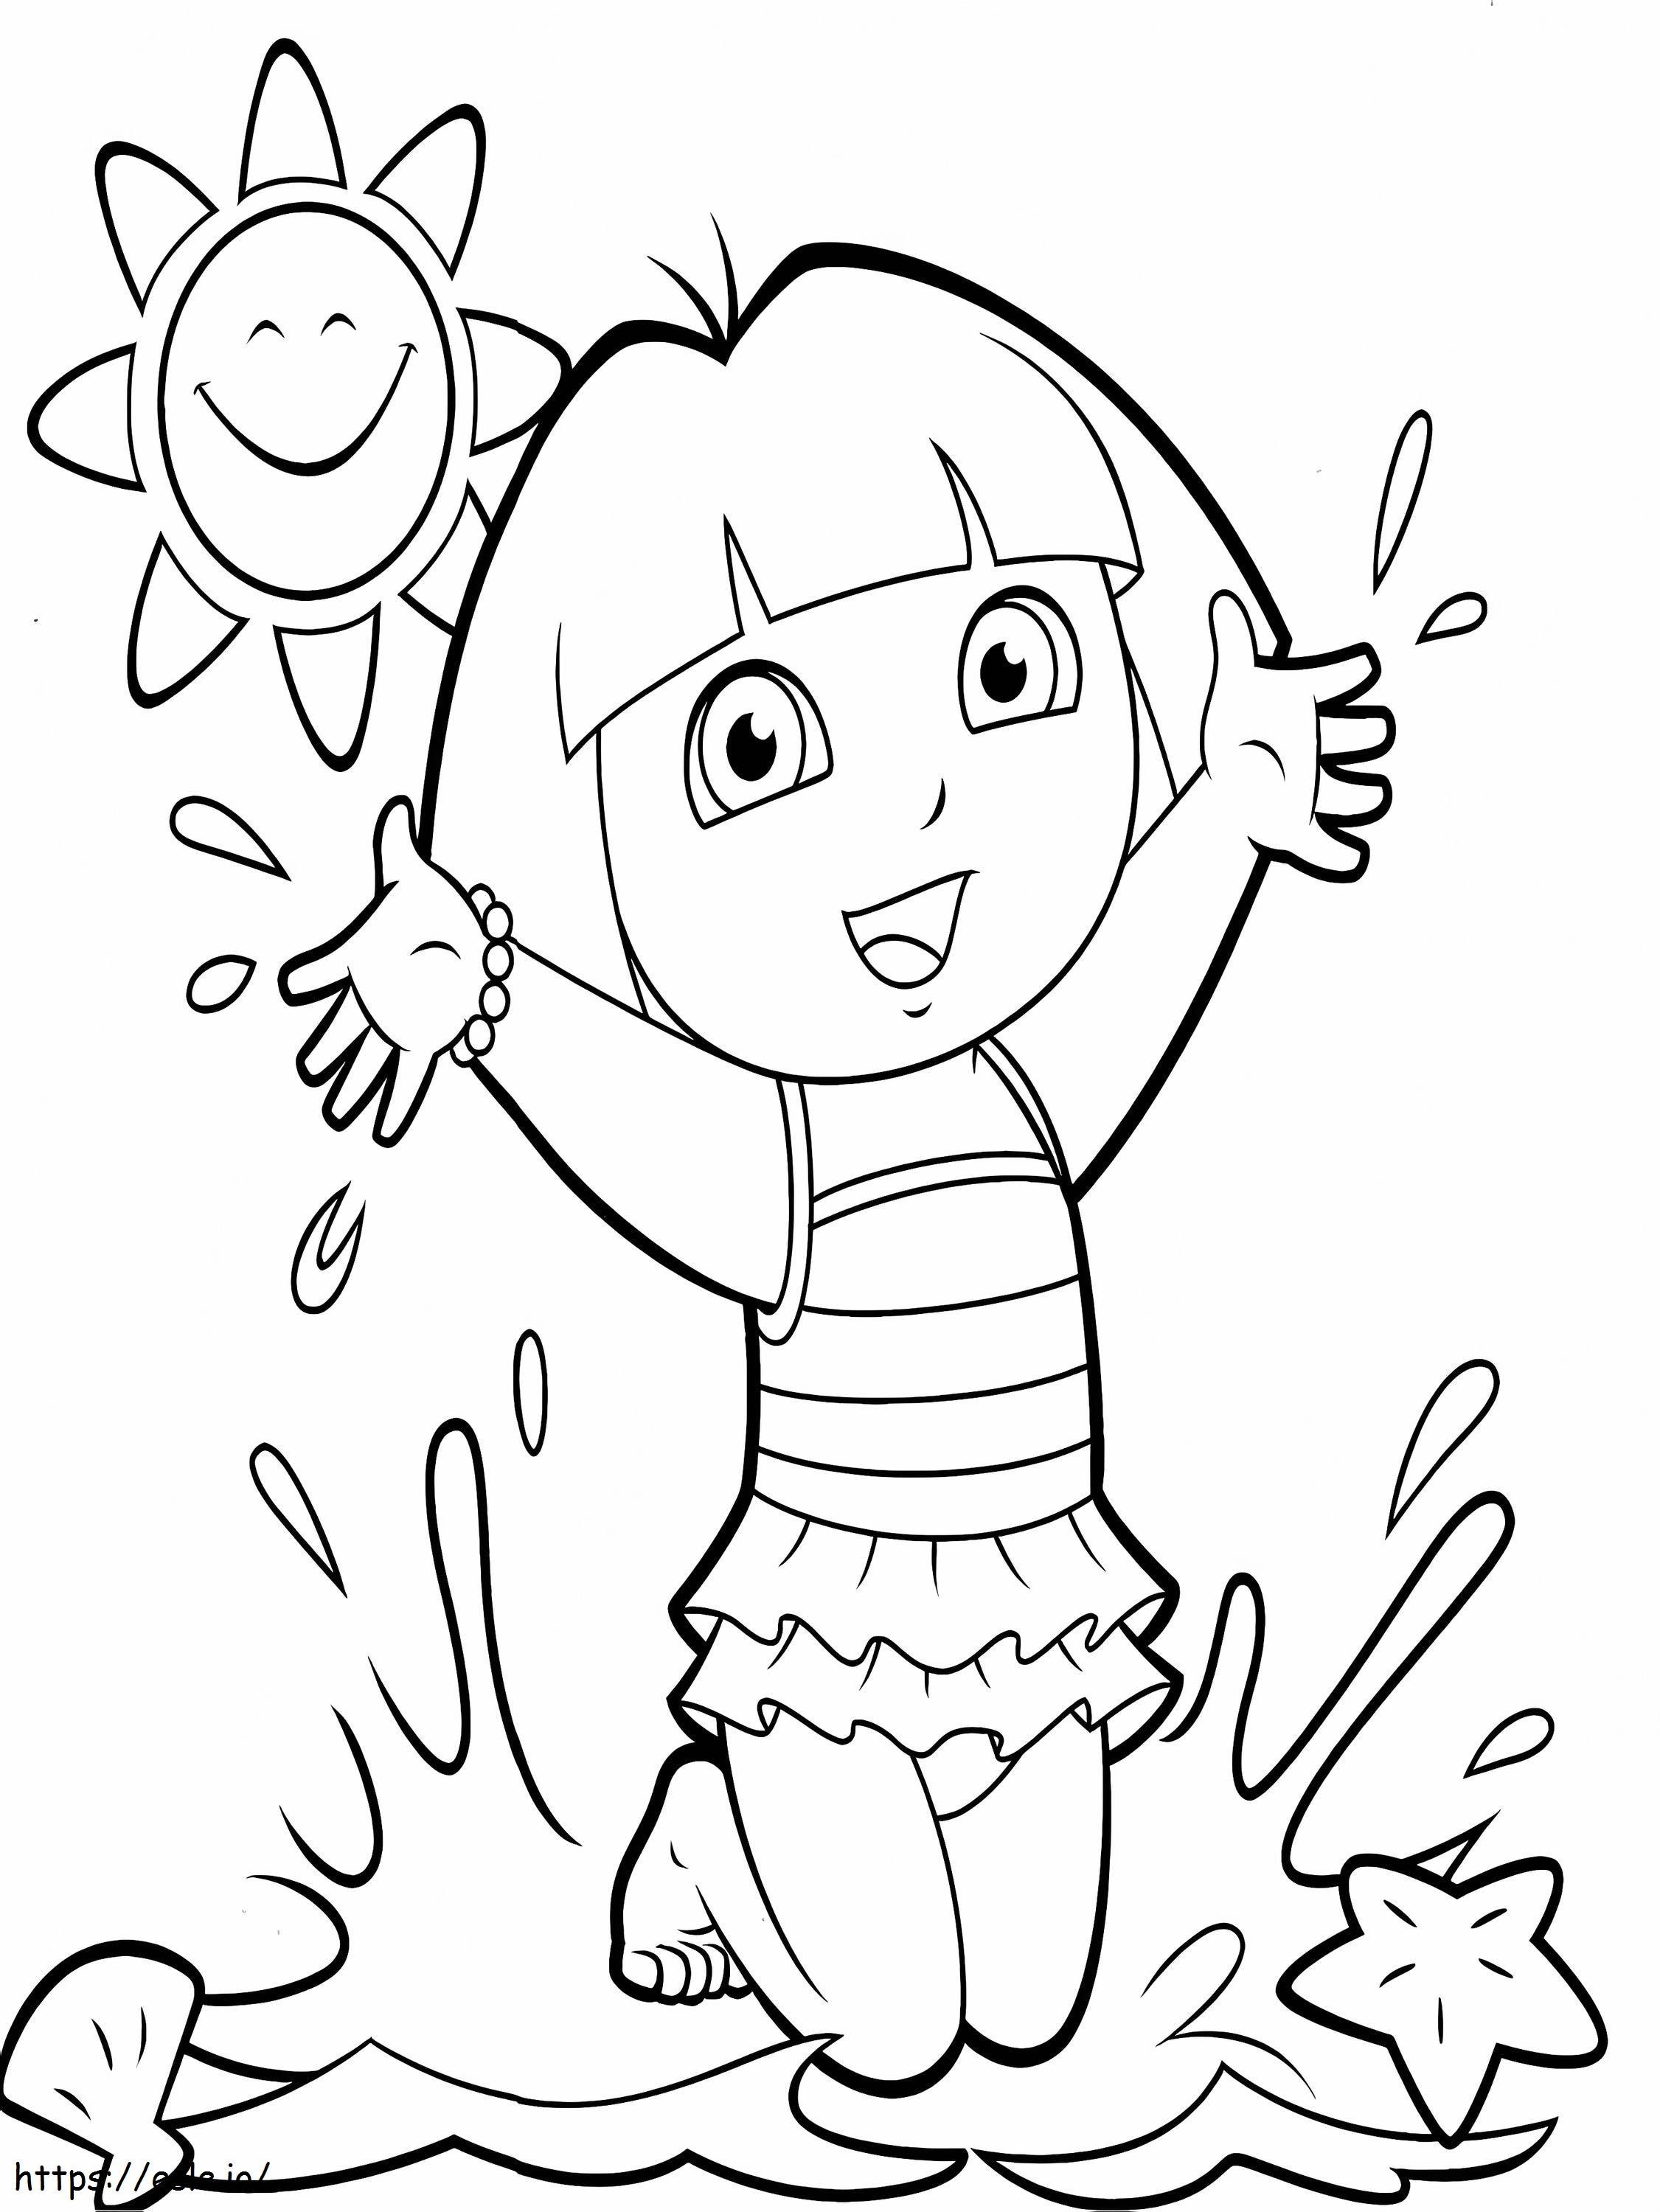 Happy Birthday Dora The Explorer Explorer Drawing At Getdrawingscom Free For Personal Coloring Explorer Dora Happy Birthday Pages The coloring page